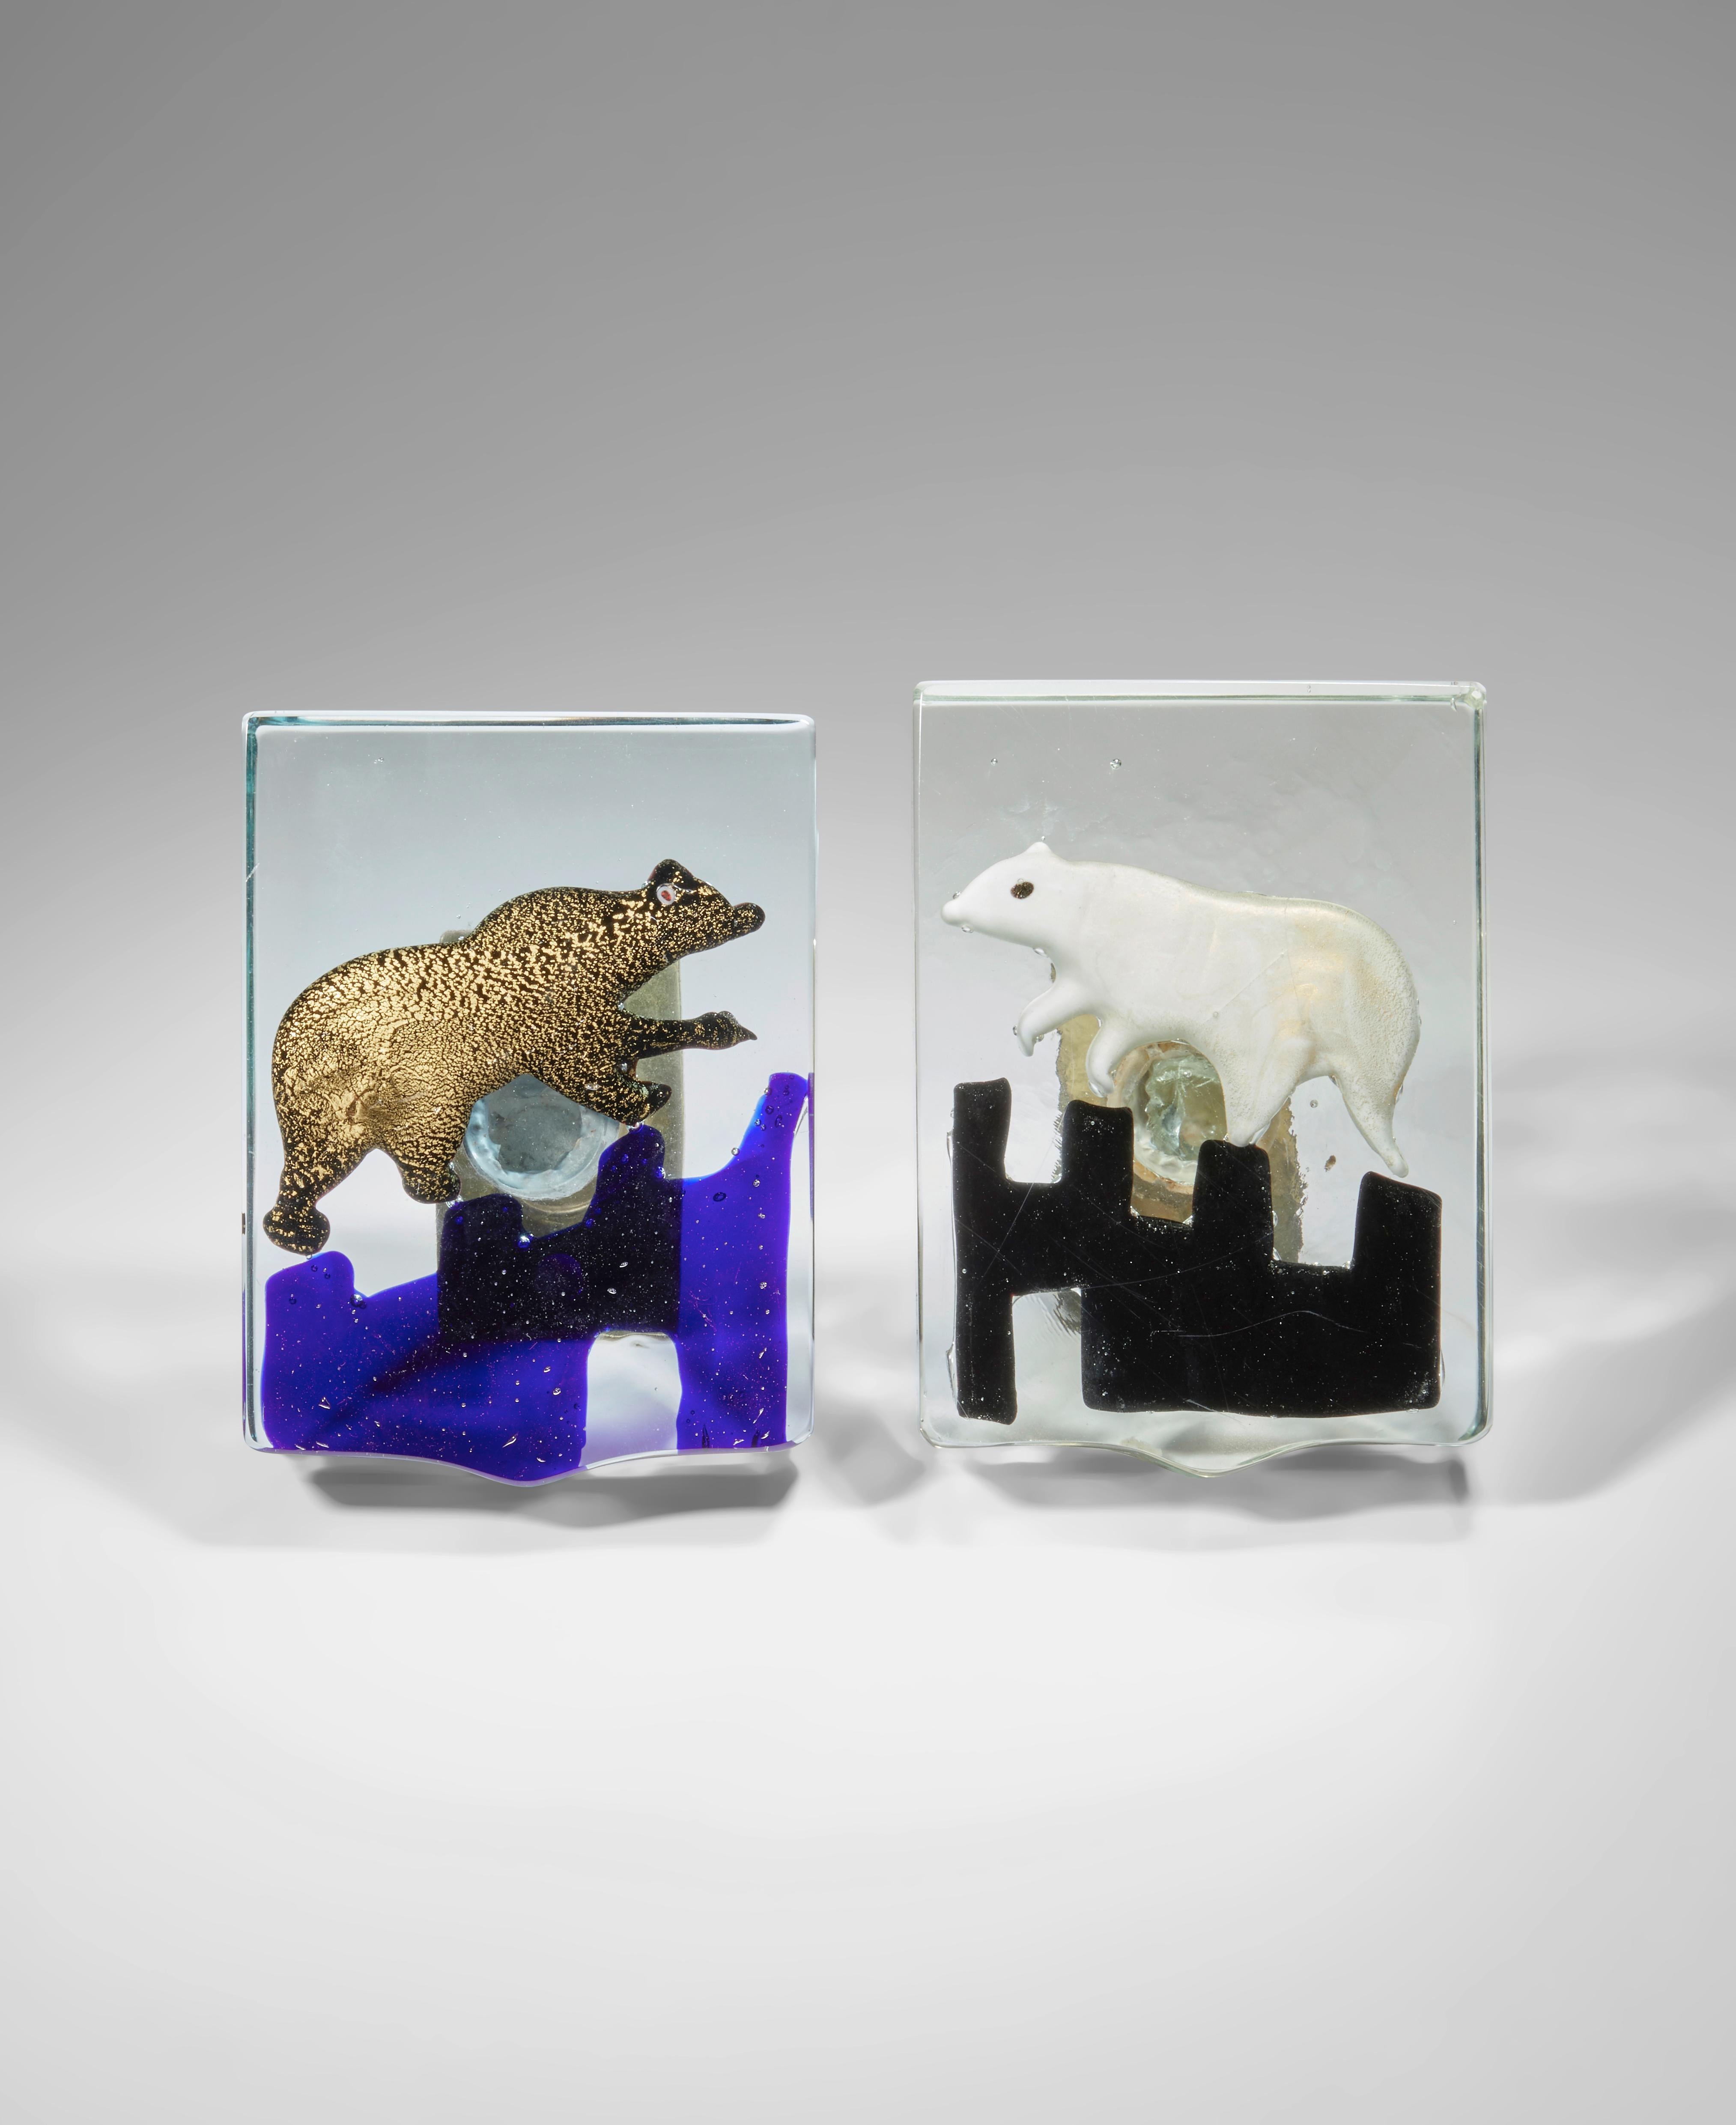 Venetian blown glass push and pull door handles from a hotel in Venice late 1940's, by Alfredo Barbini (1912-2007) for Vitreria Gino Cenedese, Italy.
Polar bears climbing on geometric glaciers set in clear and opaque glass block set with brass